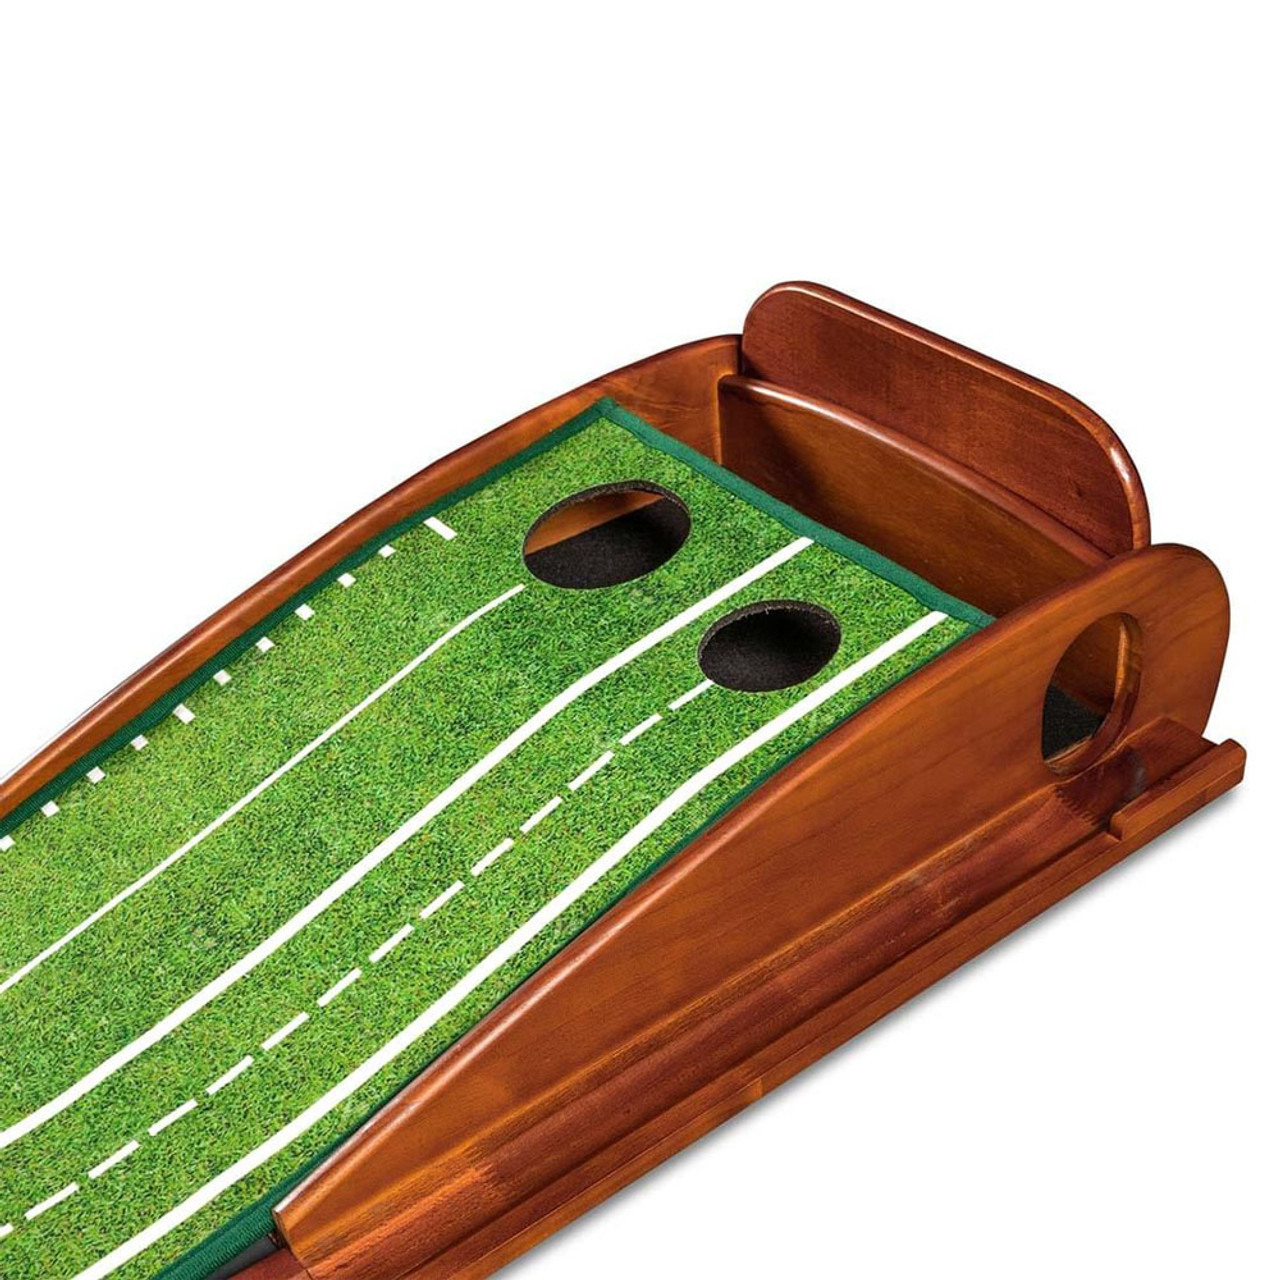 Perfect Practice Putting Mat Standard Edition